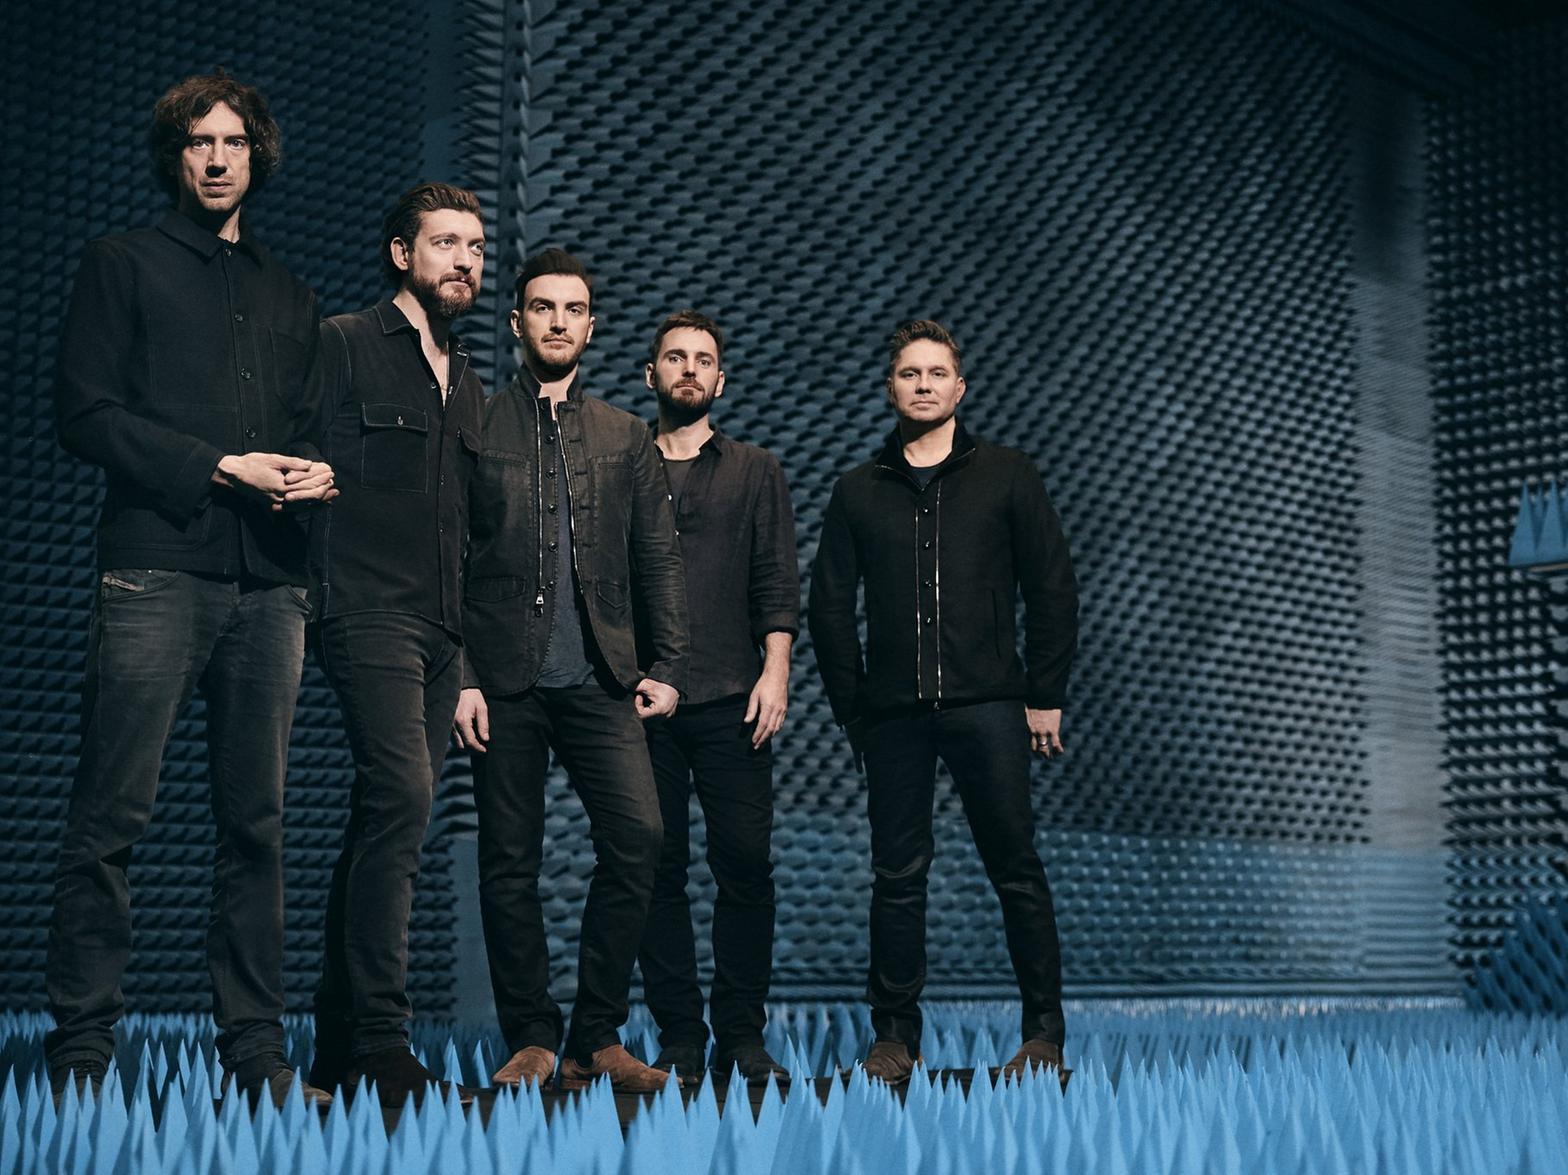 The Northern-Irish band Snow Patrol come to the Open Air Theatre on July 4.